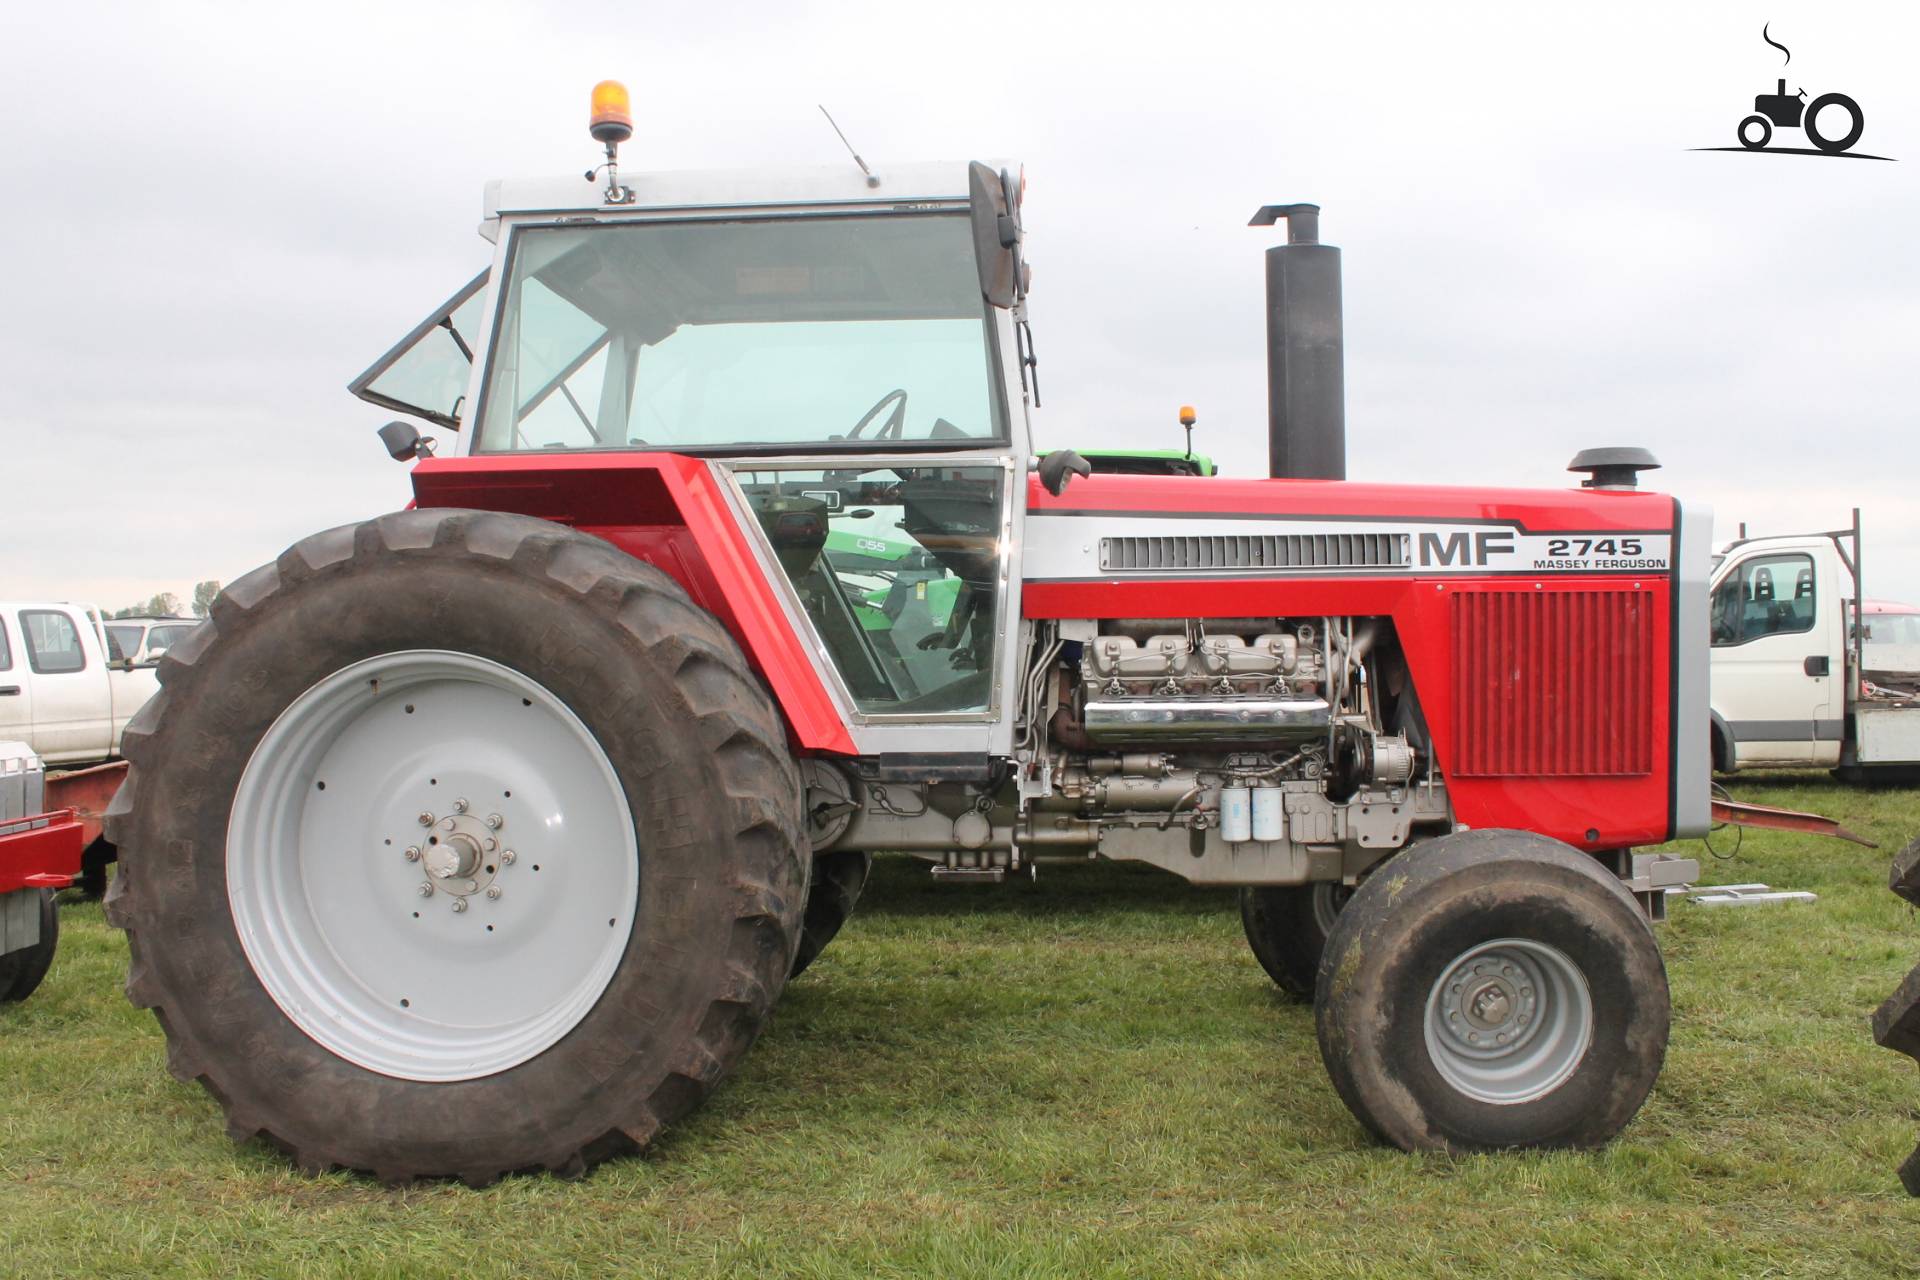 Massey Ferguson 2745 Specs and data - Everything about the Massey ...